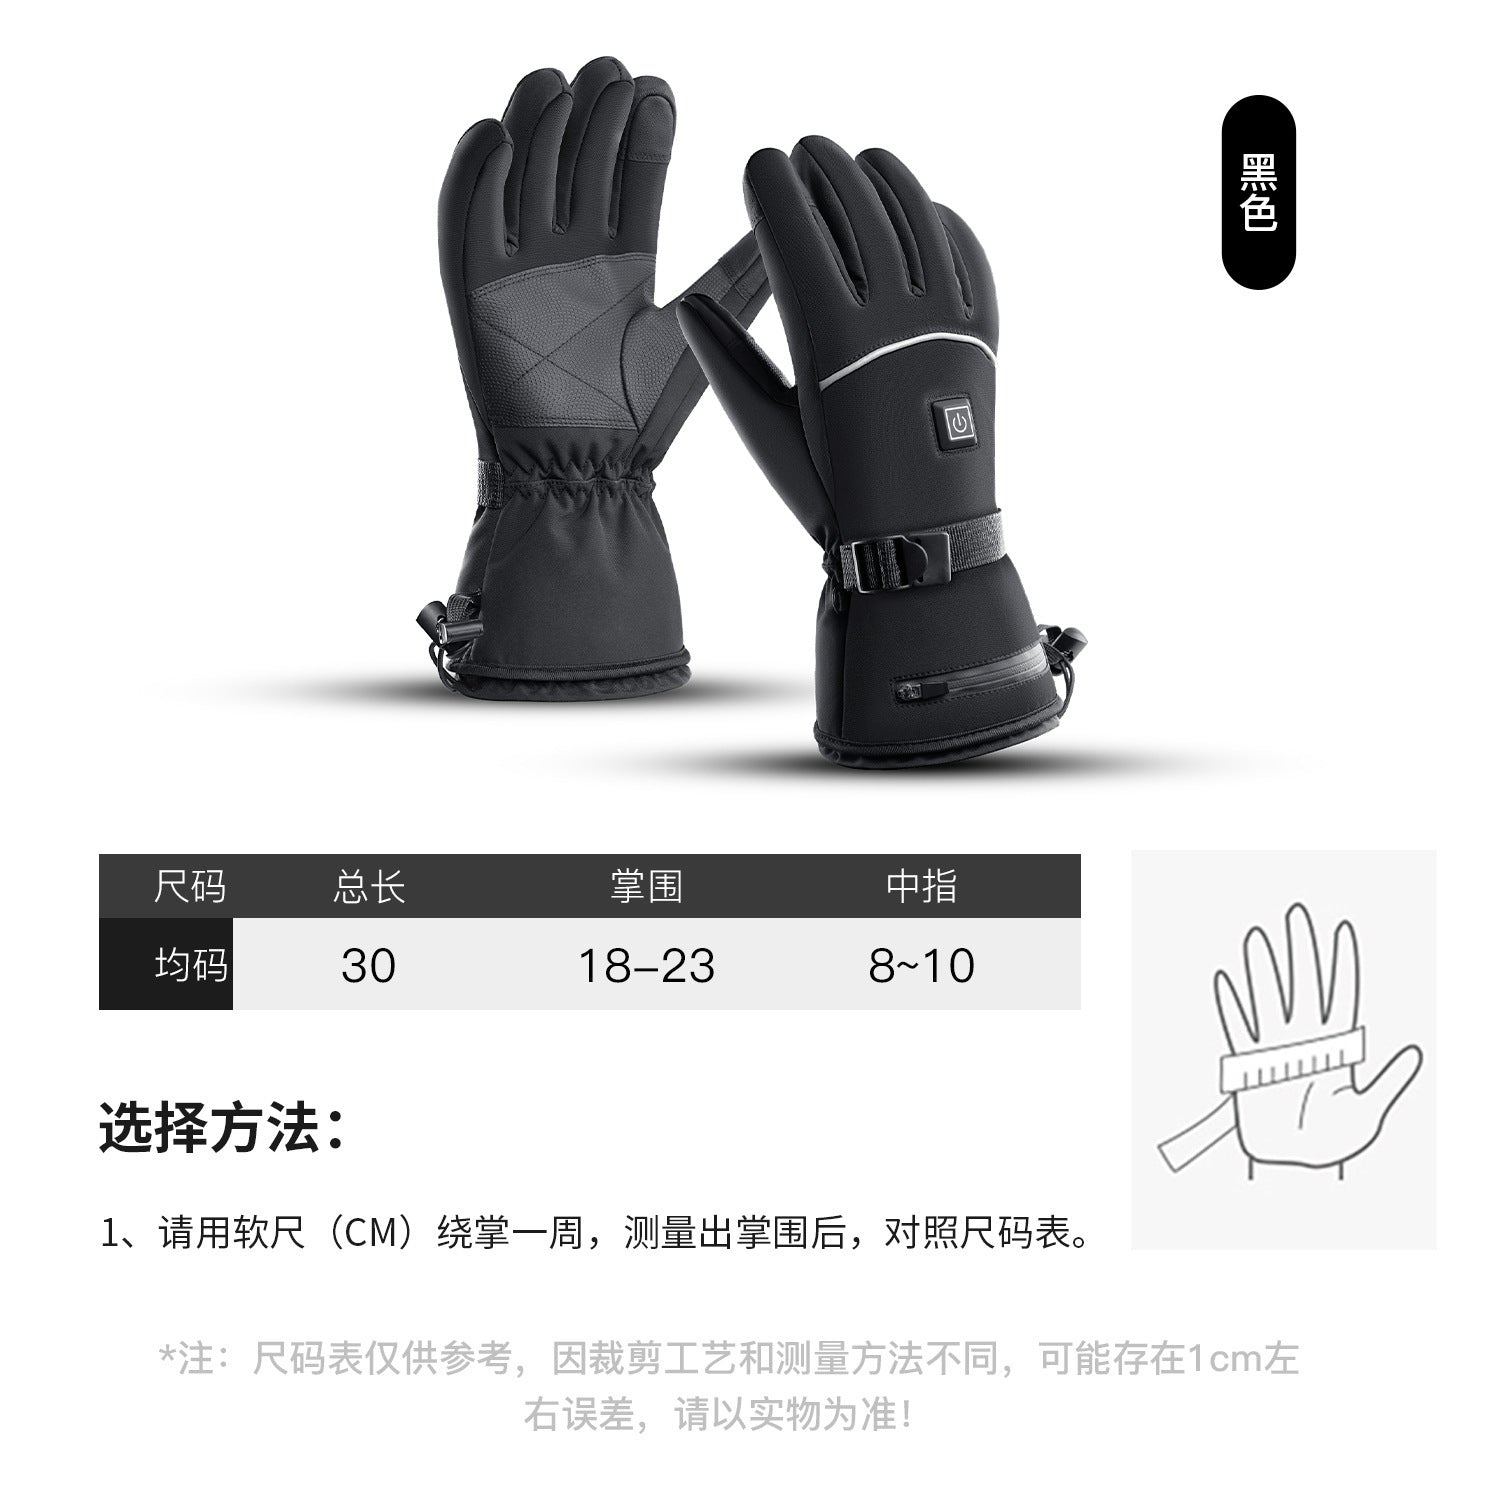 Bicycle Gloves Winter Heating Temperature Control Thermal Gloves Outdoor Sports Thermal Gloves Motorcycle Riding Gloves